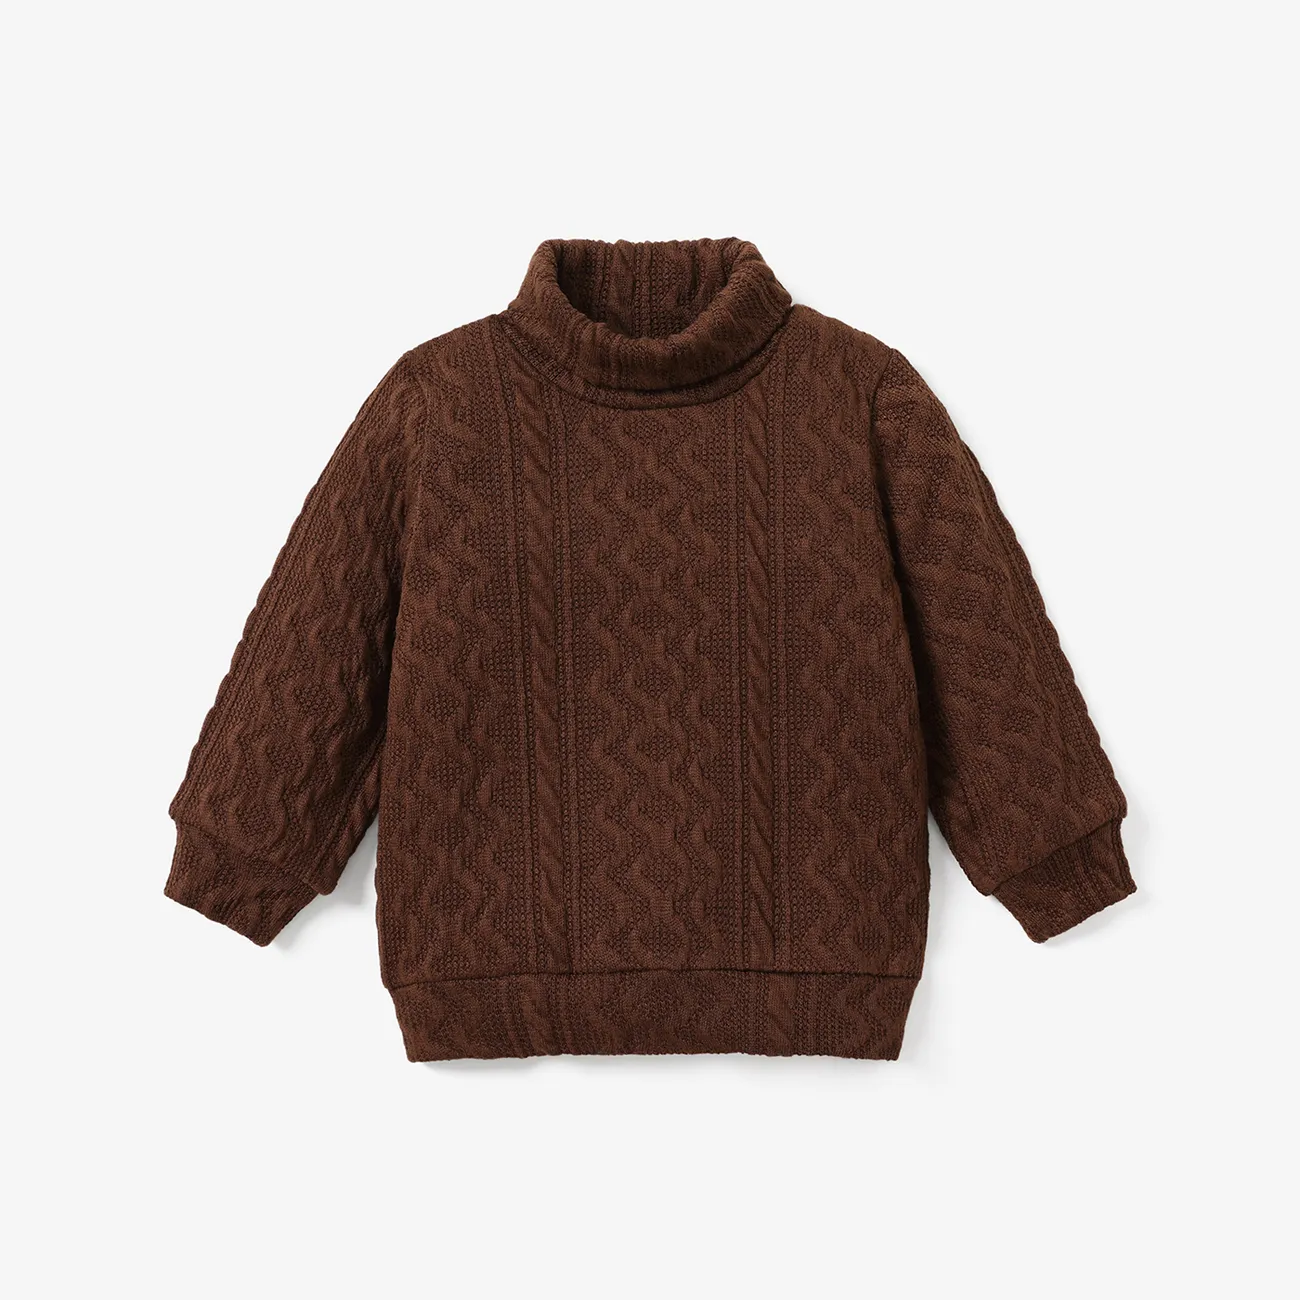 Toddler Boy Turtleneck Cable Knit Textured Sweater Brown big image 1